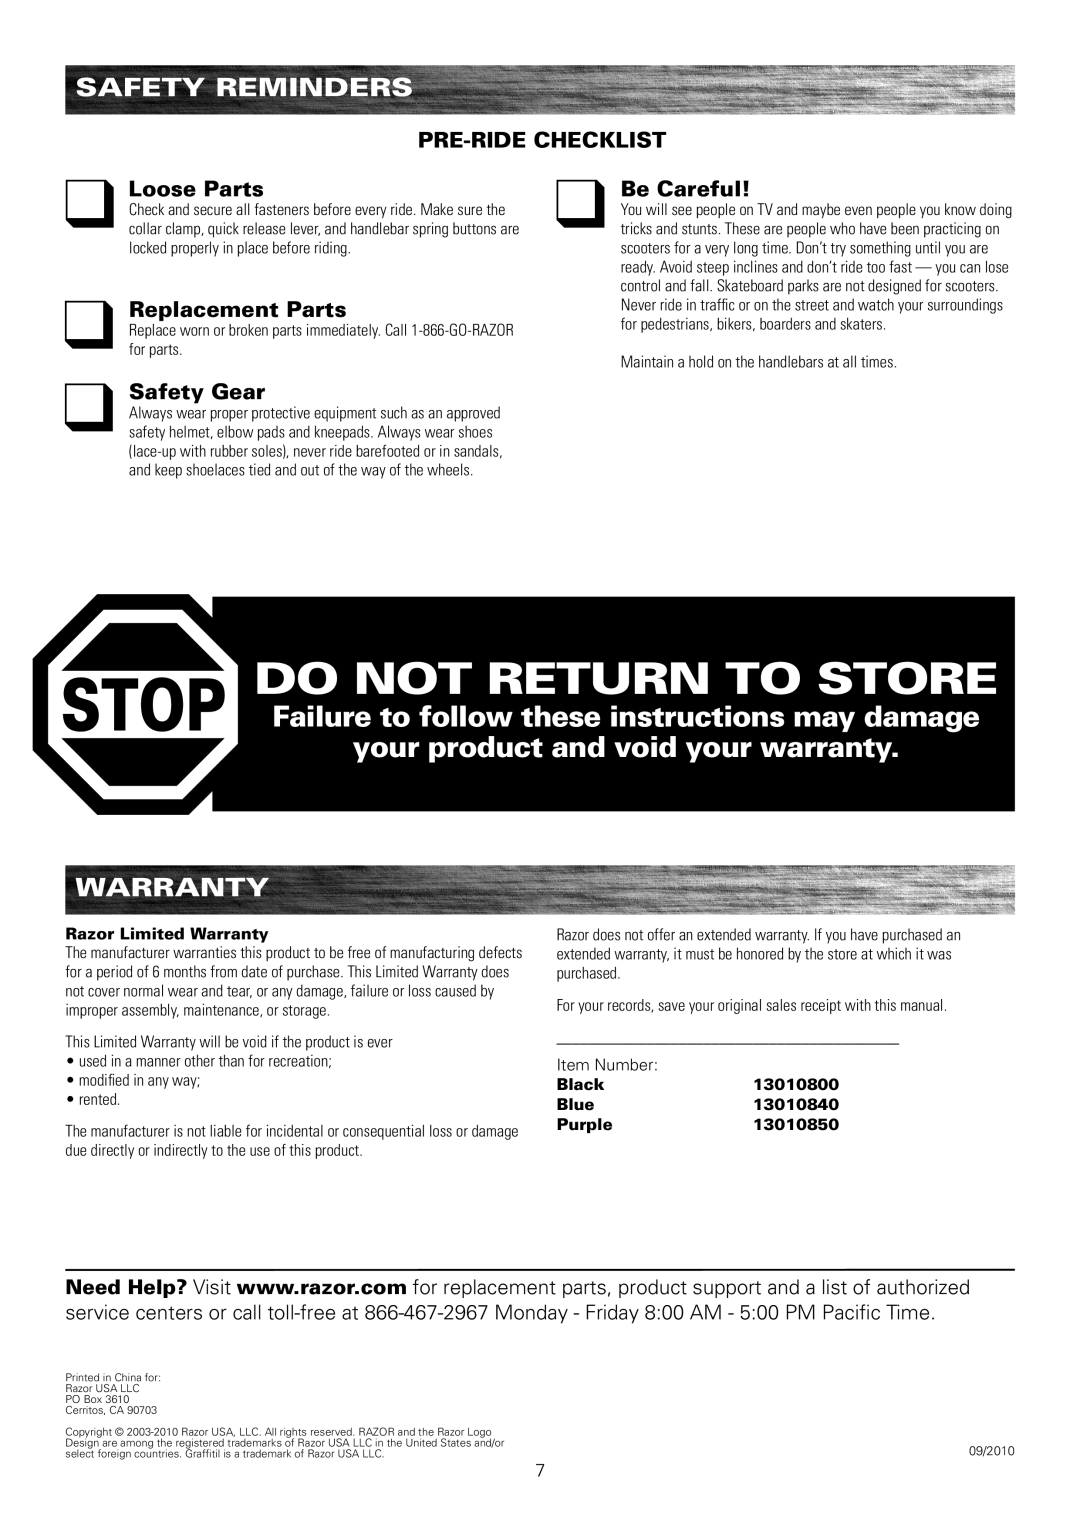 Razor 13010840 Safety reminders, Warranty, Pre-Ride Checklist, Loose Parts, Be Careful, Replacement Parts, Safety Gear 